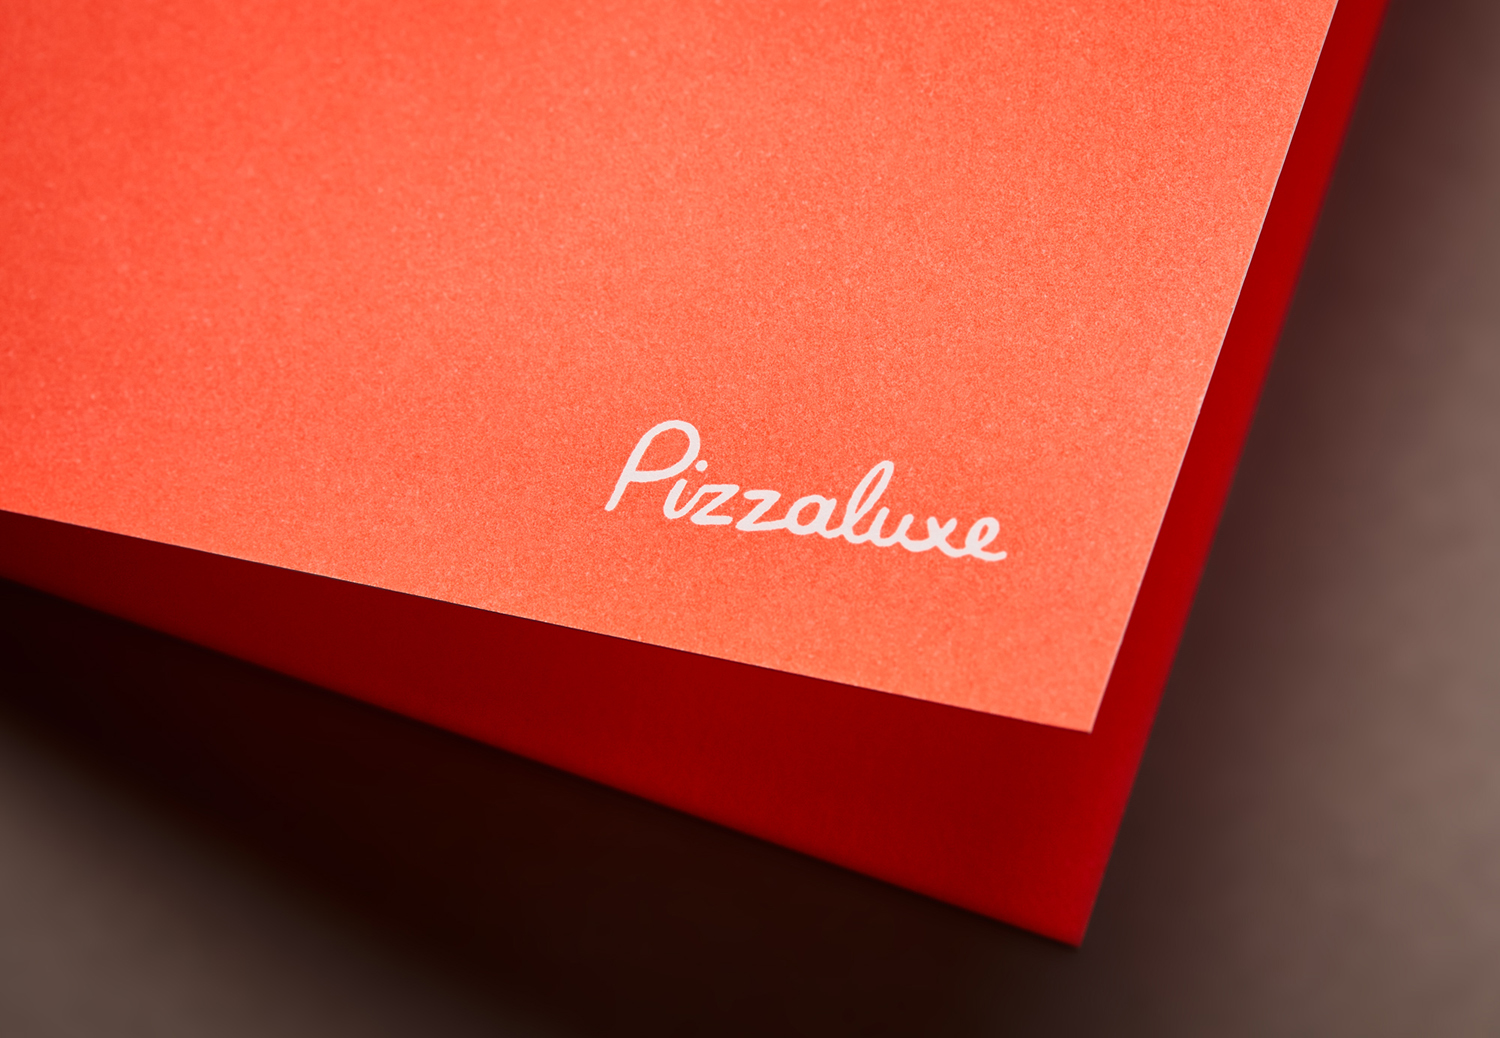 Print for PizzaLuxe designed by Touch